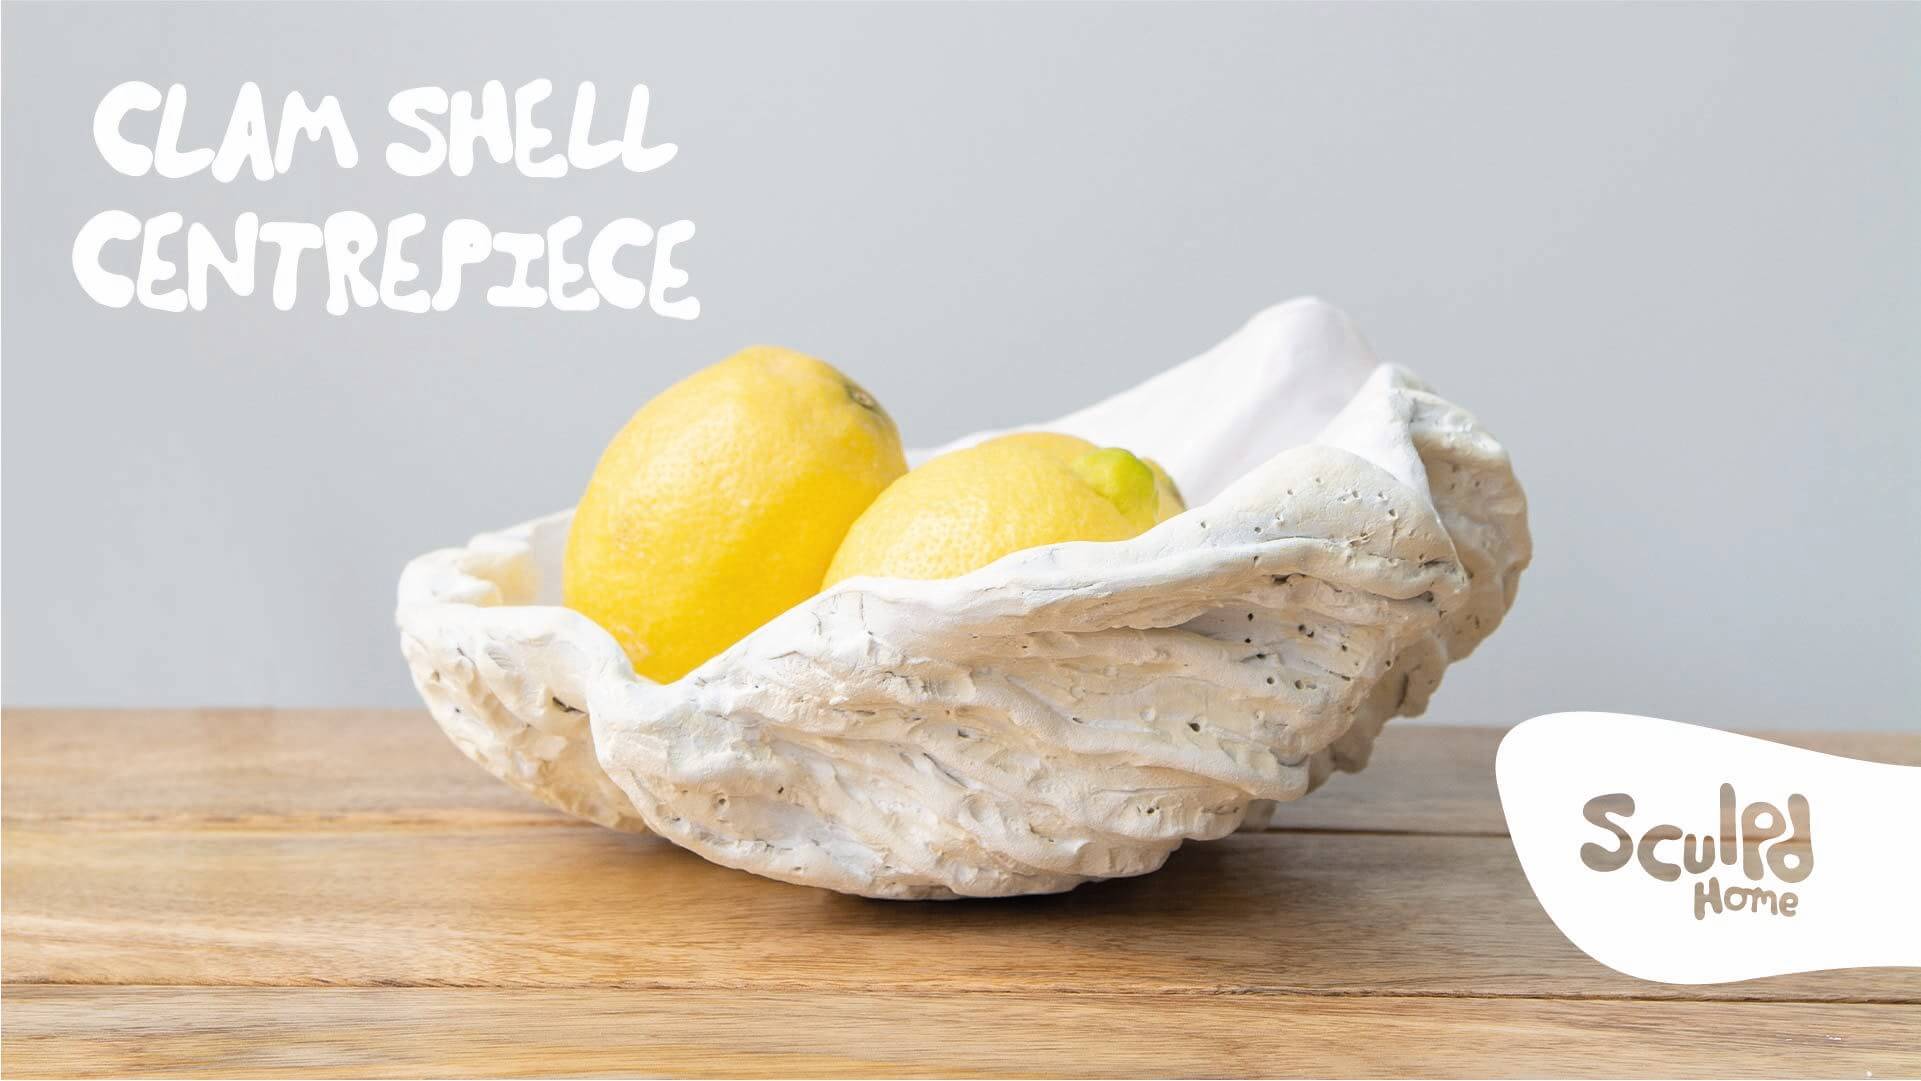 Make Your Own Clam Shell Centrepiece | By Sculpd Home